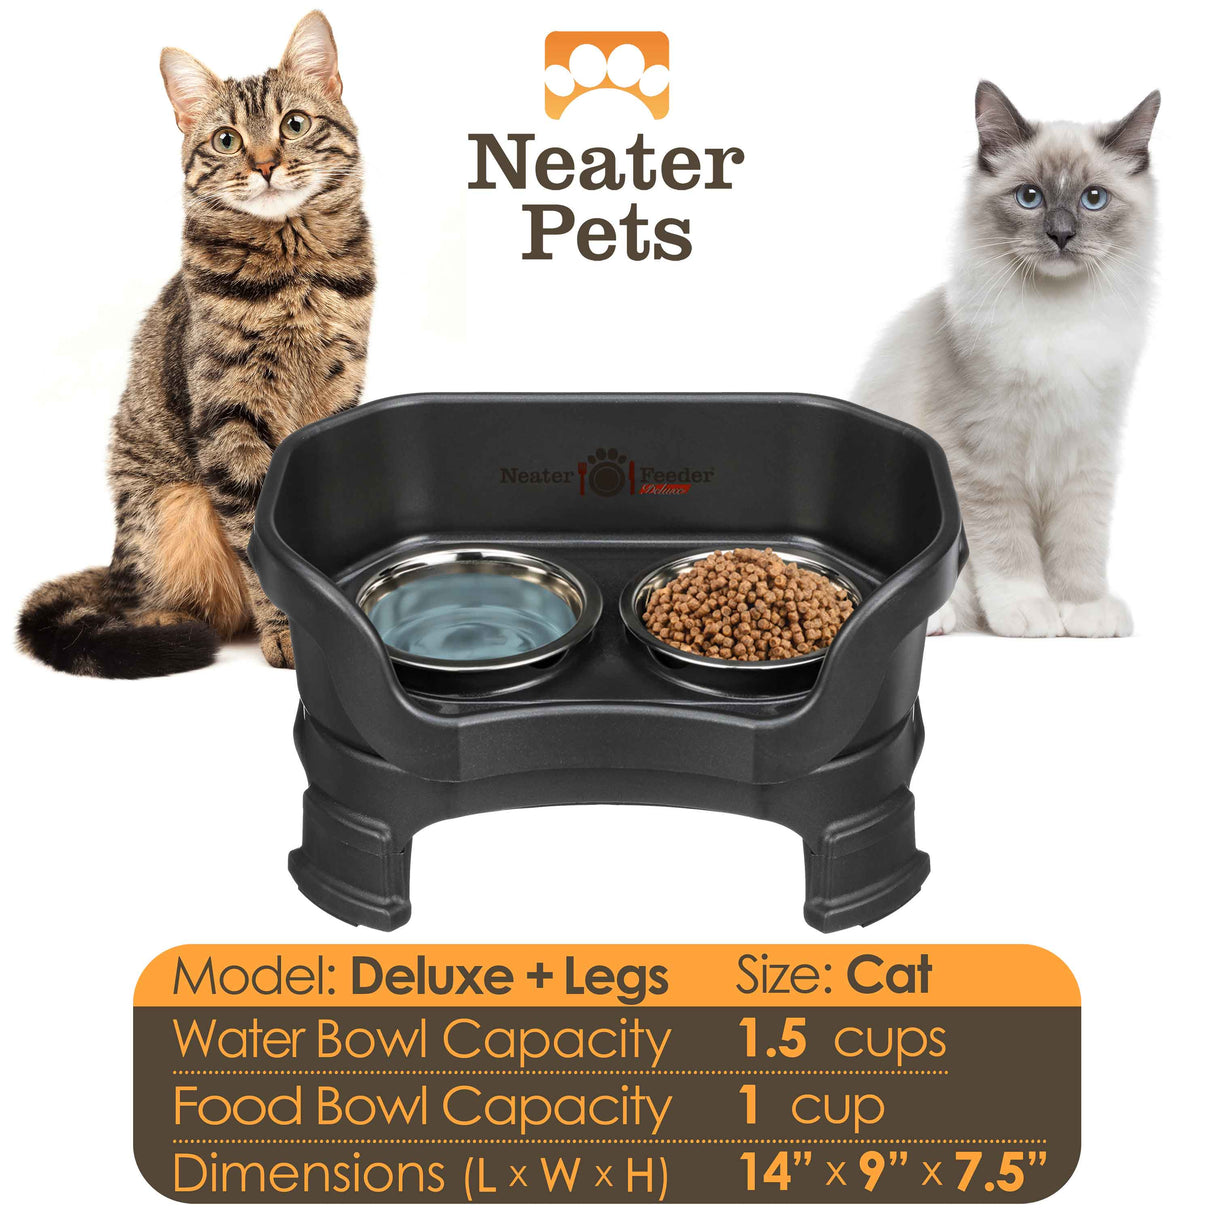 Deluxe cat with leg extensions bowl capacity and dimensions